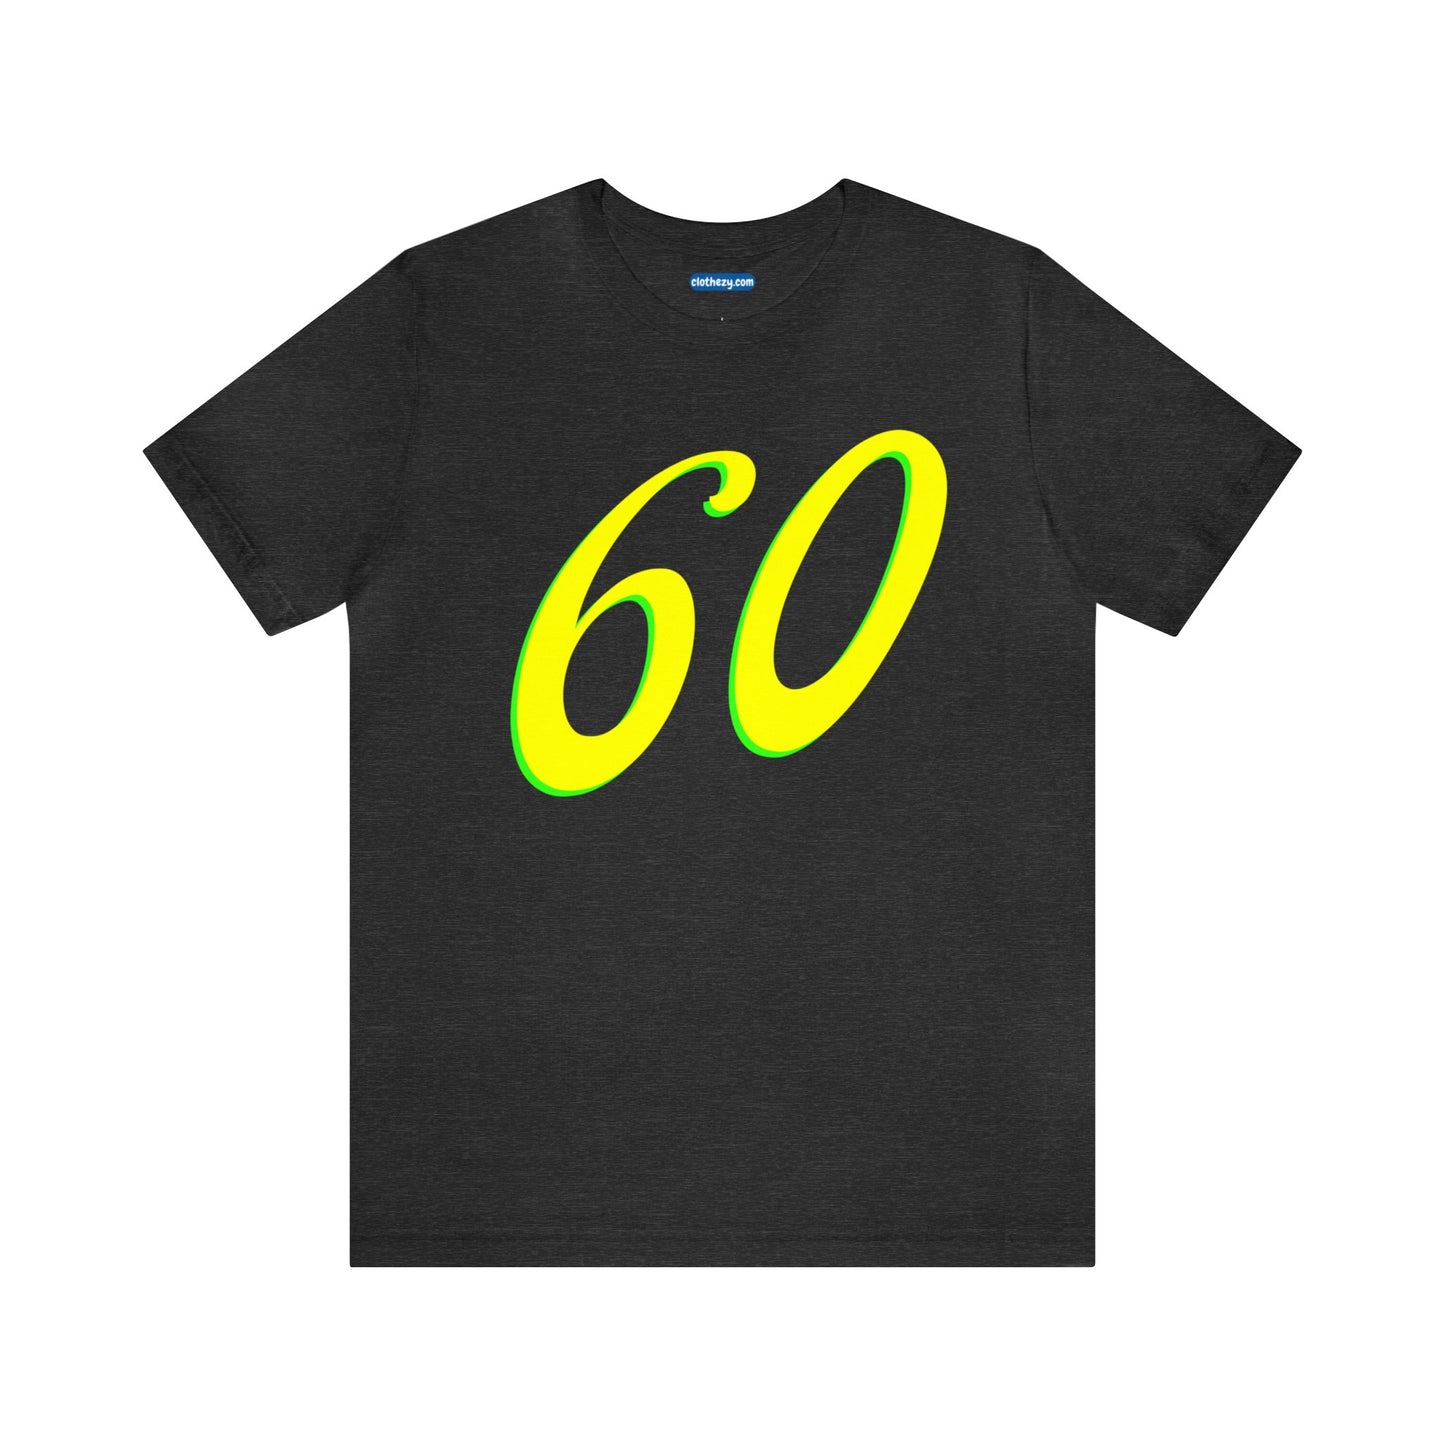 Number 60 Design - Soft Cotton Tee for birthdays and celebrations, Gift for friends and family, Multiple Options by clothezy.com in Dark Grey Heather Size Small - Buy Now